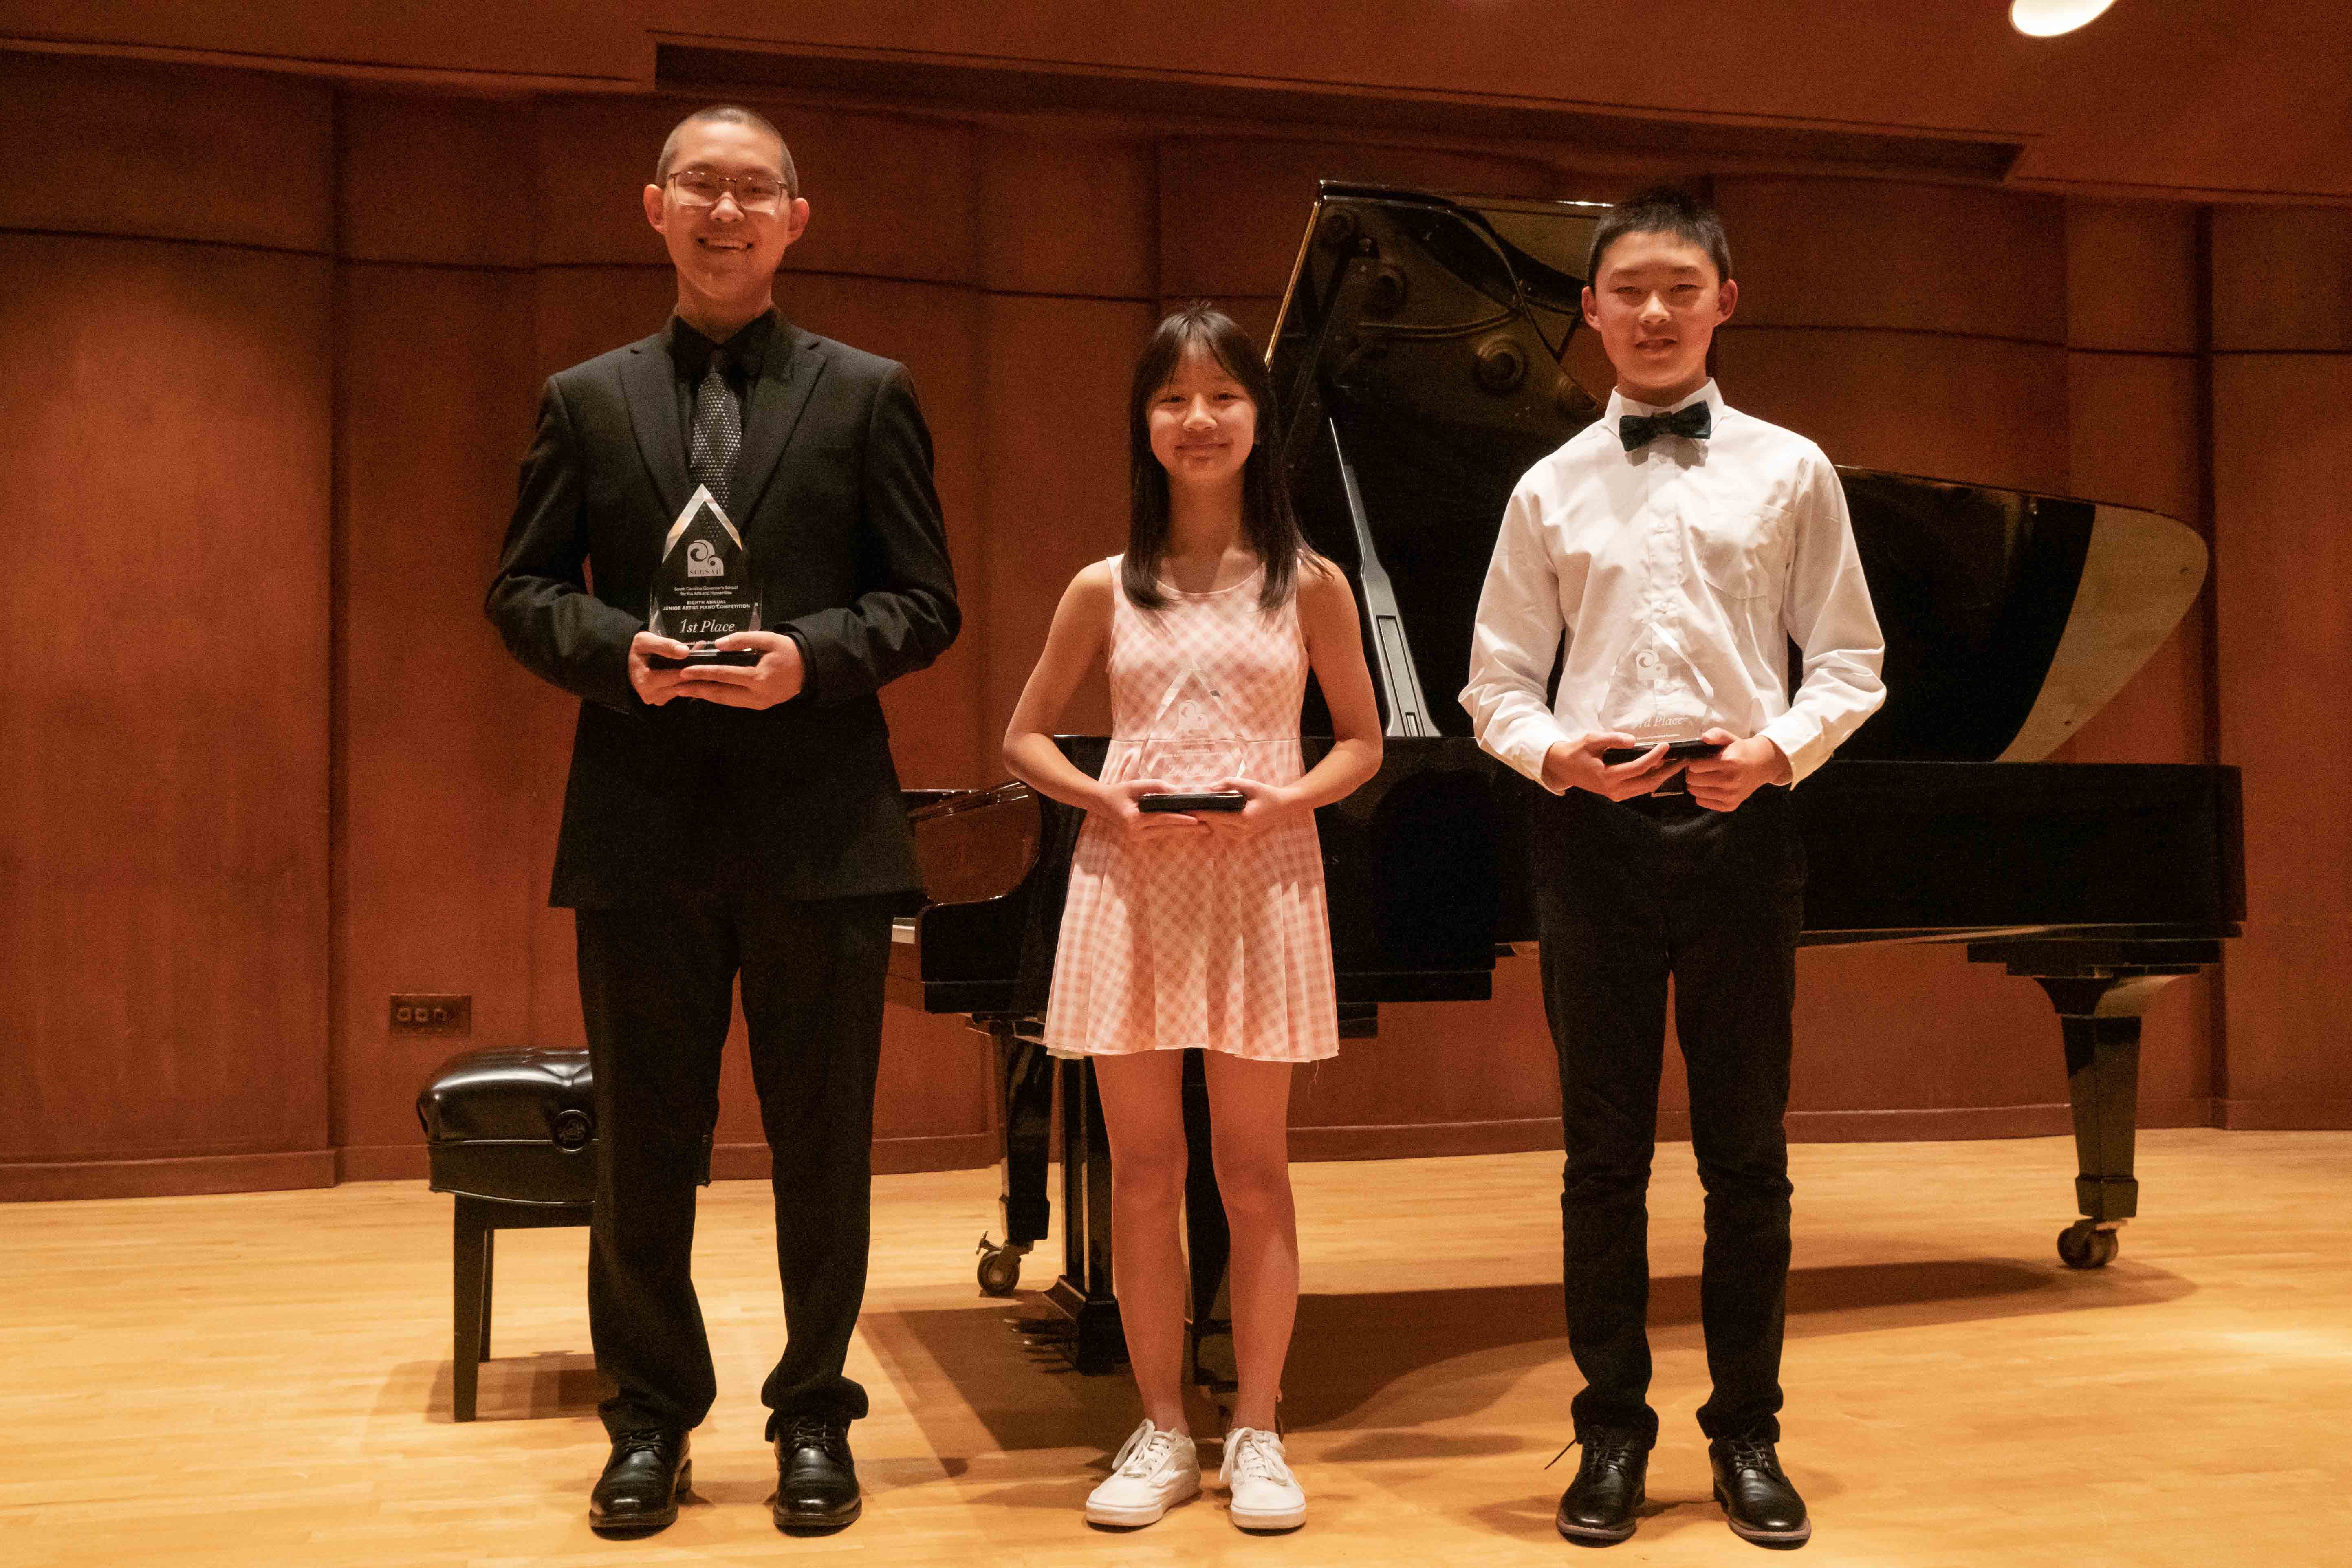 Winners of the piano competition